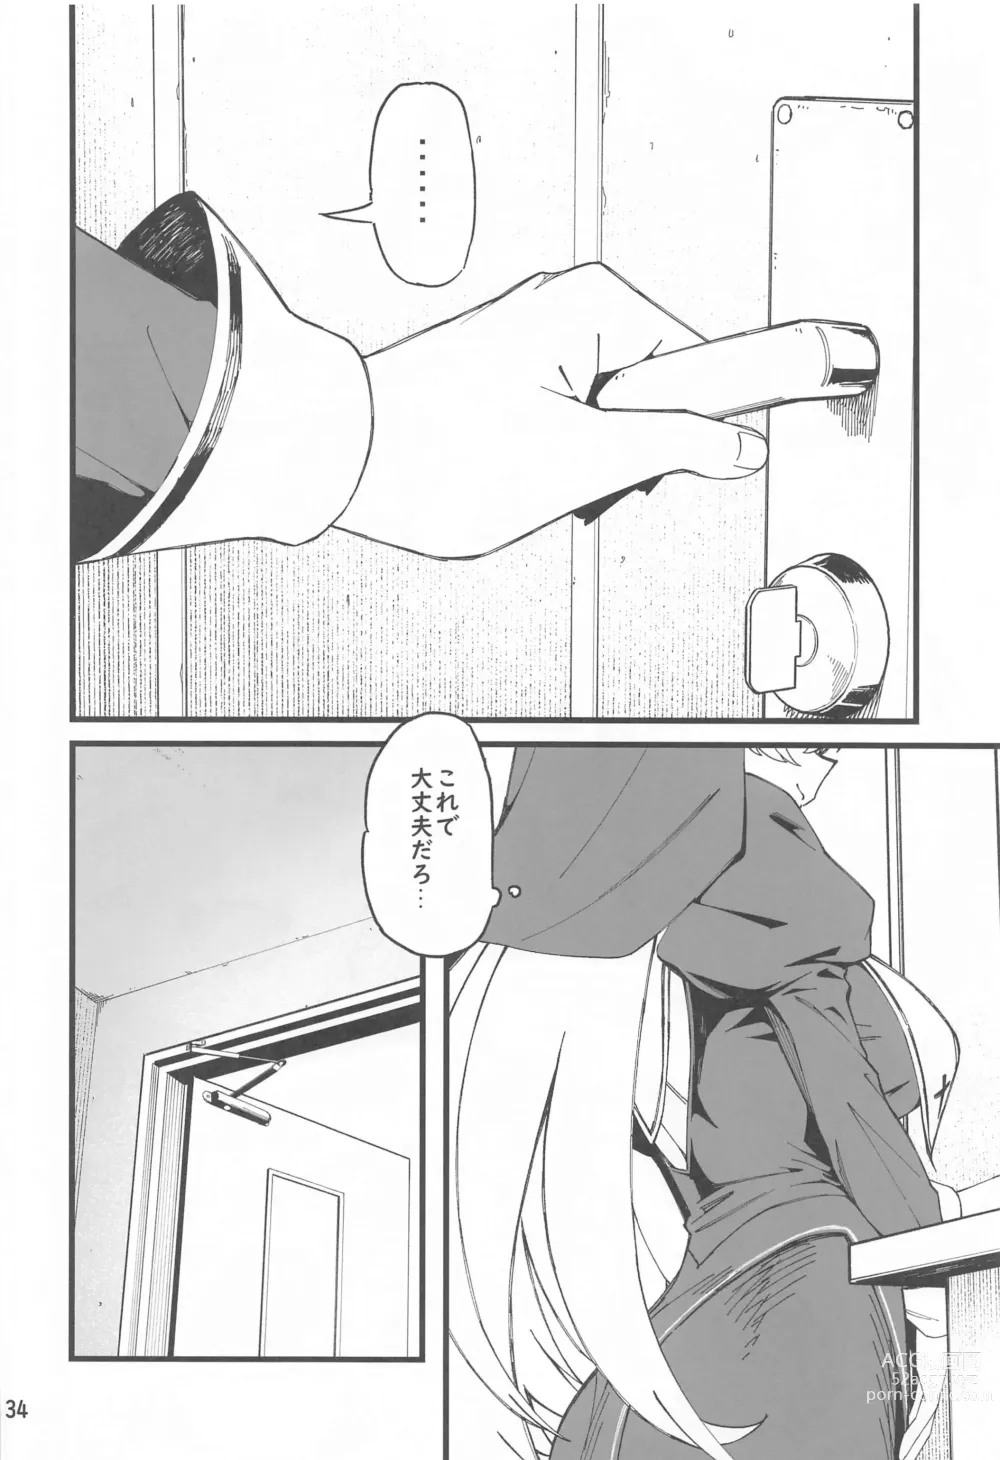 Page 35 of doujinshi IM HORNY